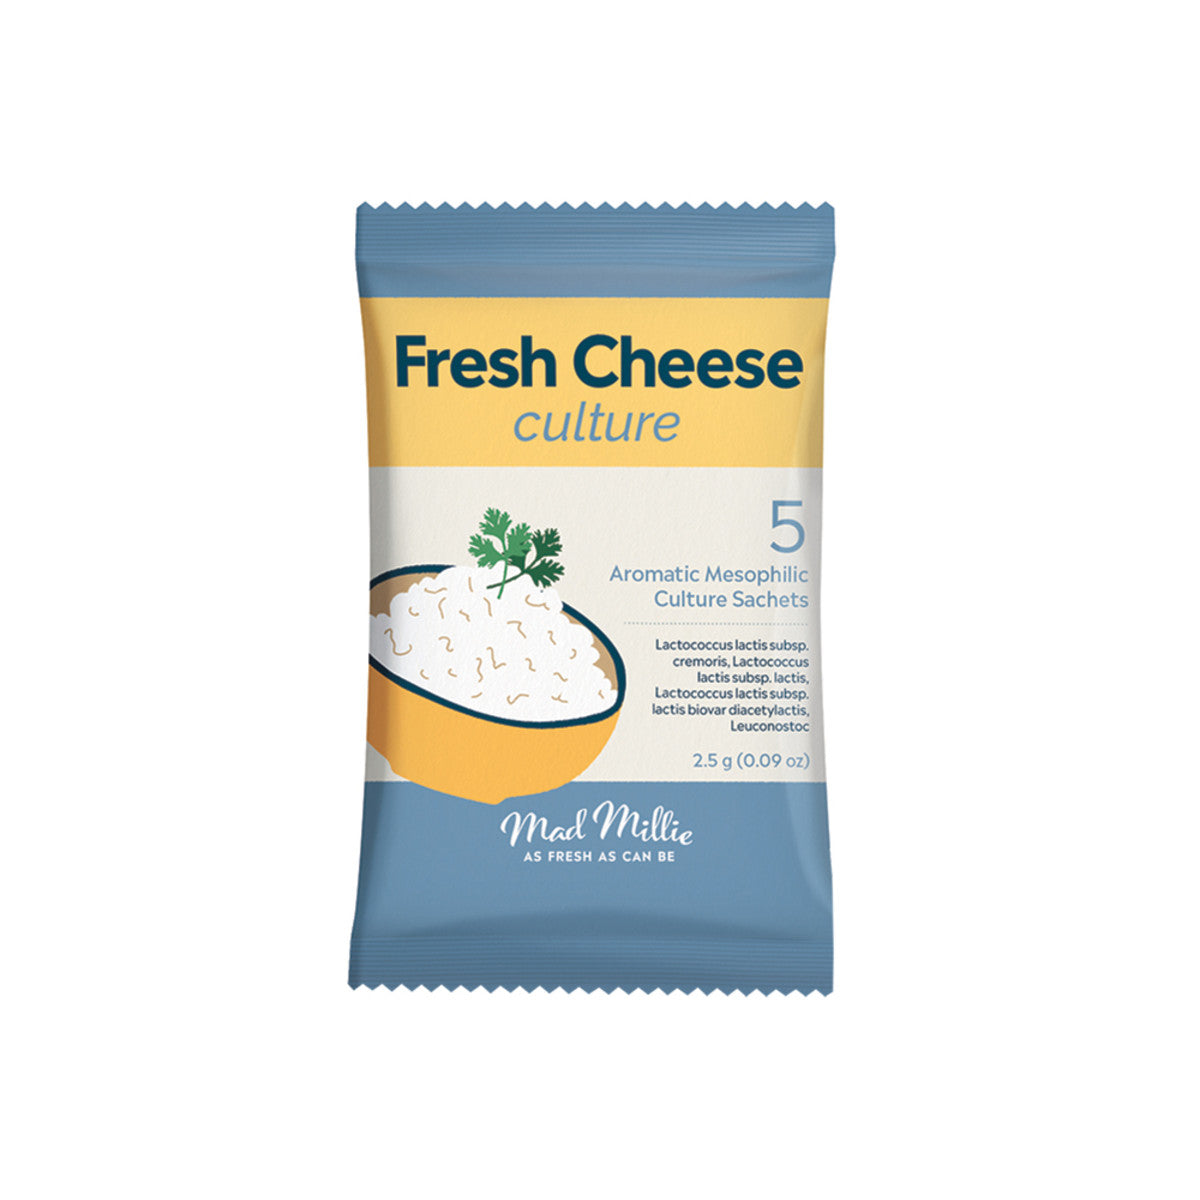 Mad Millie - Fresh Cheese Culture (Arom Mesophilic) Sachets x5Pk